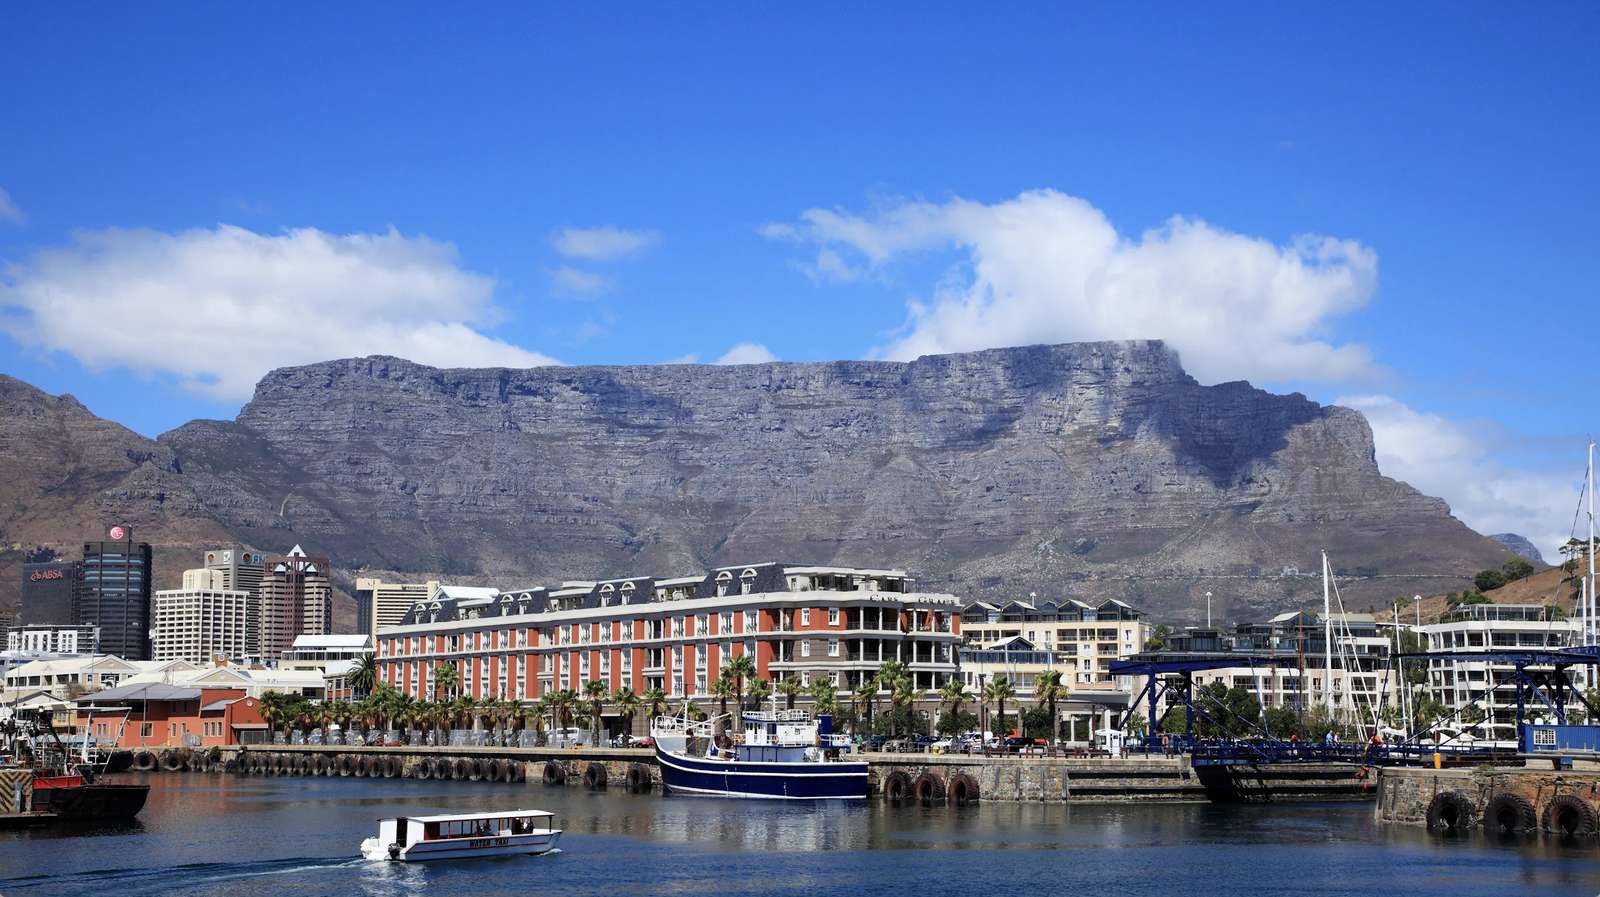 Table Mountain, South Africa puzzle online from photo